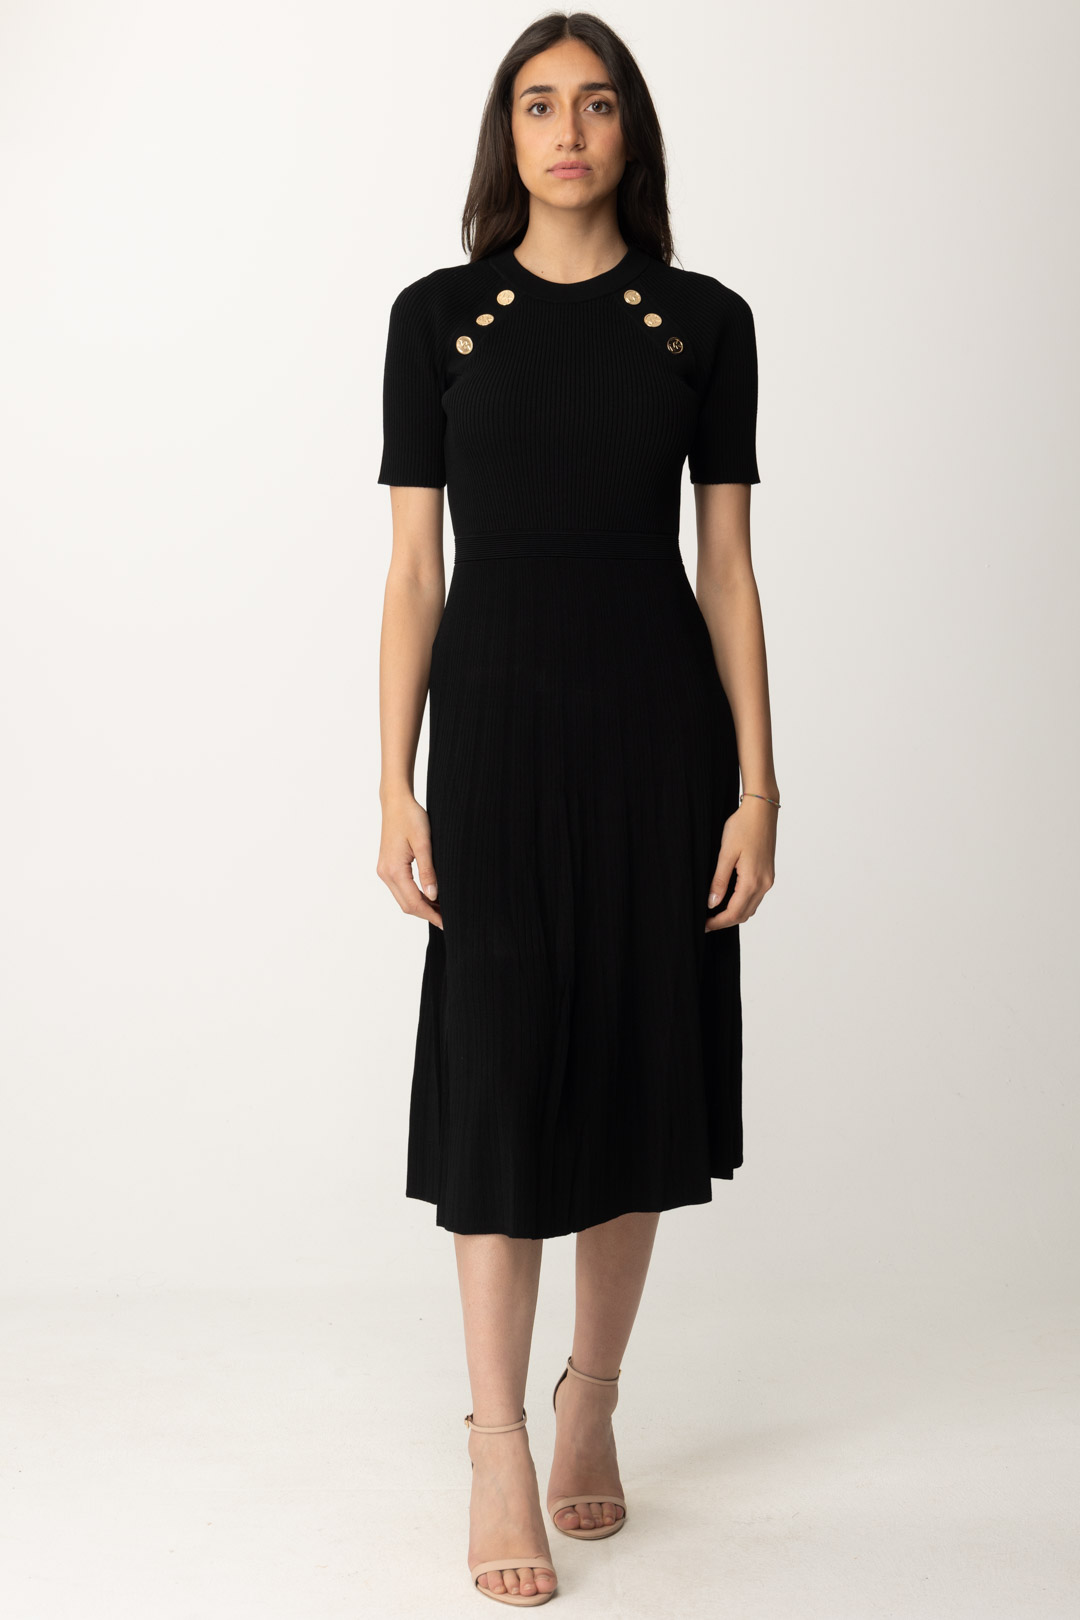 Preview: Michael Kors Ribbed dress with buttons Black